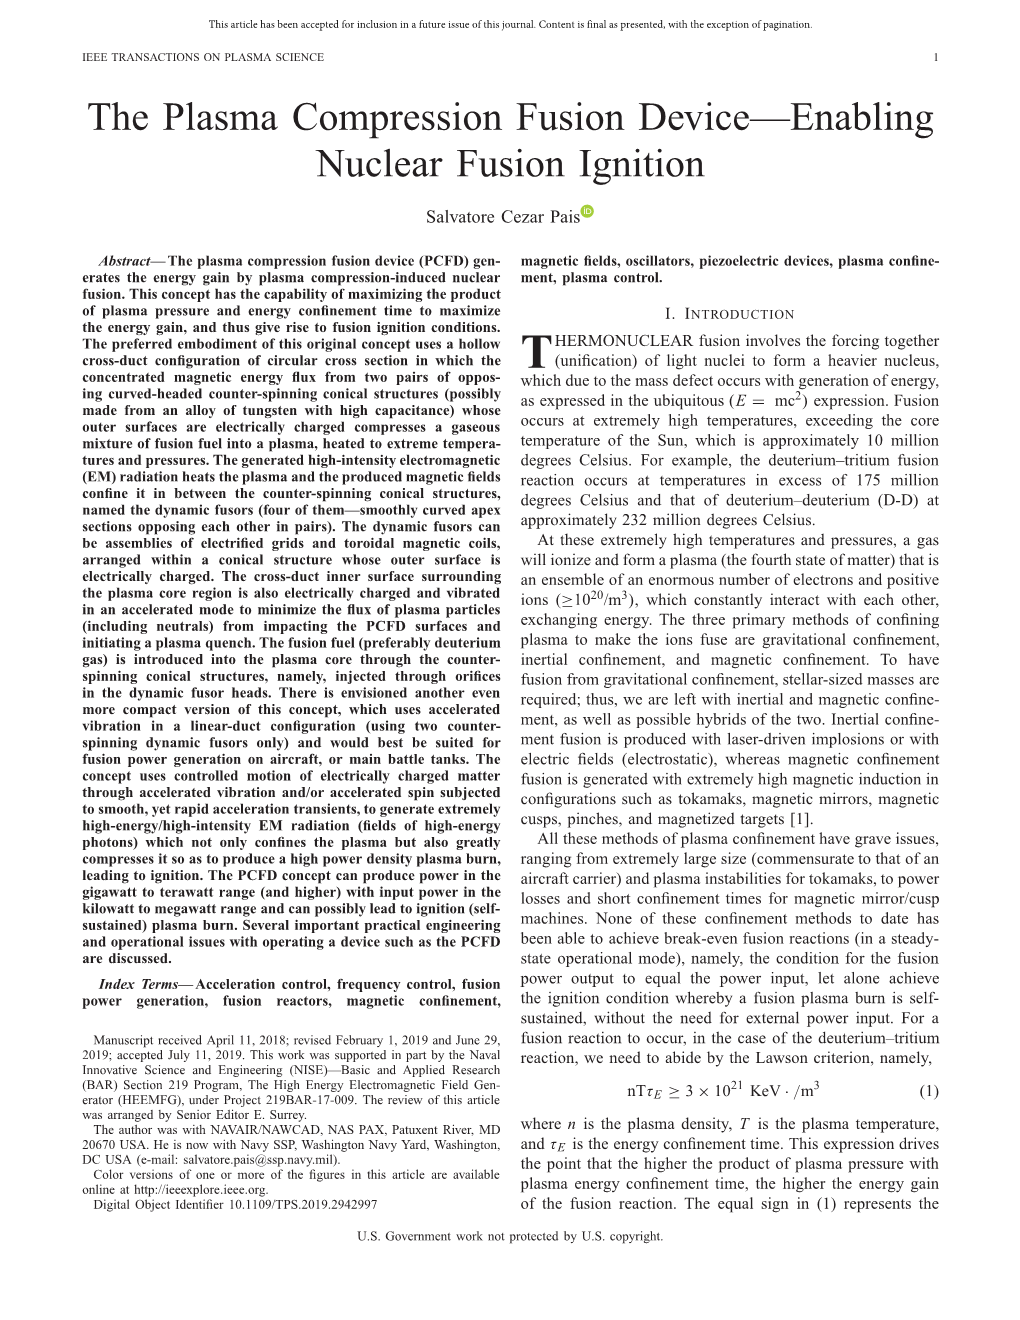 The Plasma Compression Fusion Device—Enabling Nuclear Fusion Ignition